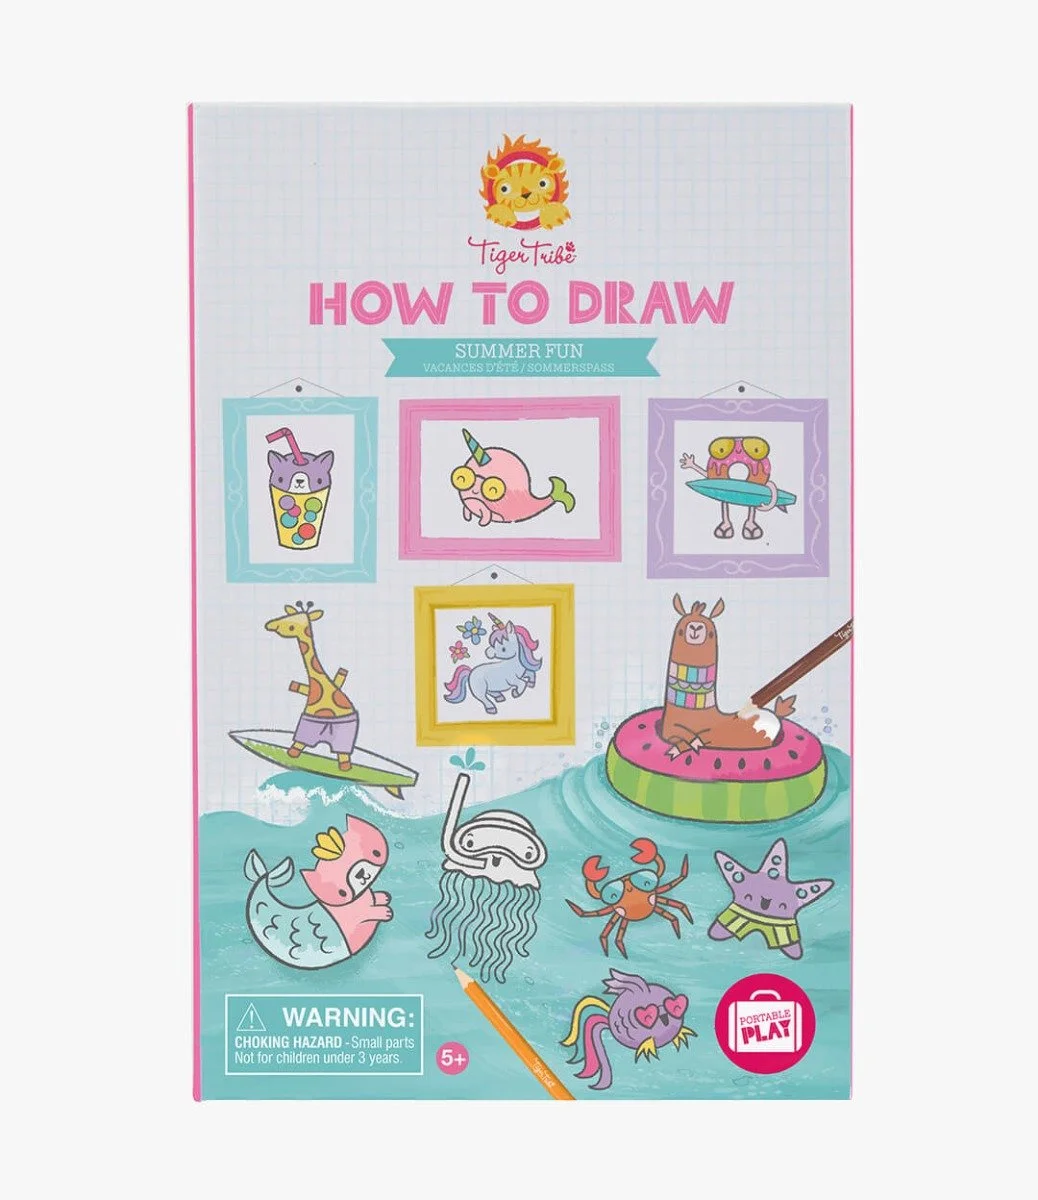 How to Draw - Summer Fun by Tiger Tribe